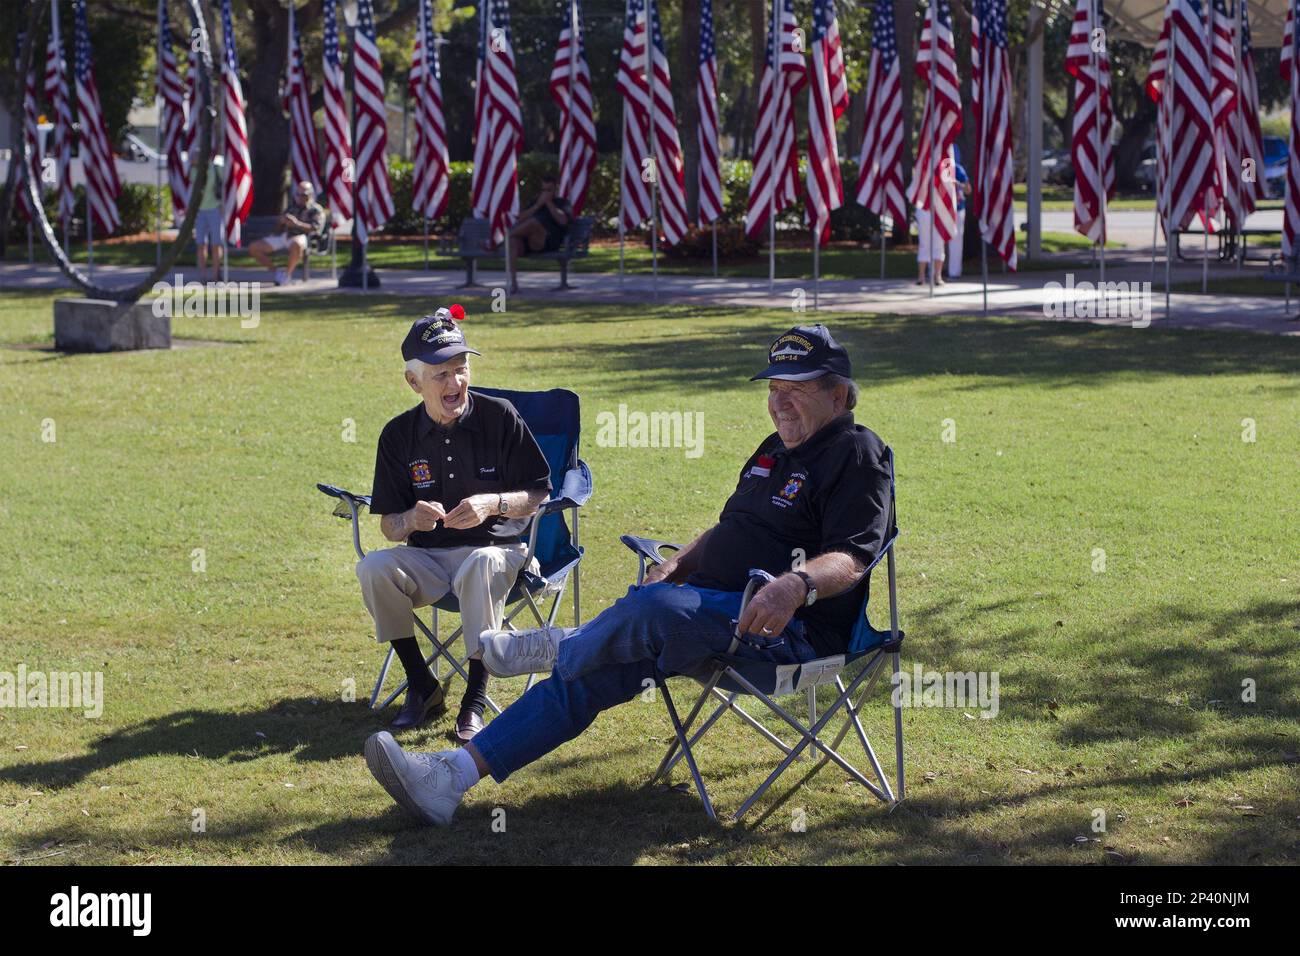 Frank Steinke, left, and Max Zillig talk before the start of the Bonita Springs' Veterans Day memorial service at Riverside Park in Bonita Springs, Fla. on Tuesday, Nov. 11, 2014. The friends met as shipmates on the USS Ticonderoga in 1955. "We traveled around the world together," said Steinke. "The ship almost broke in half." (AP Photo/Naples Daily News, Carolina Hidalgo) Banque D'Images